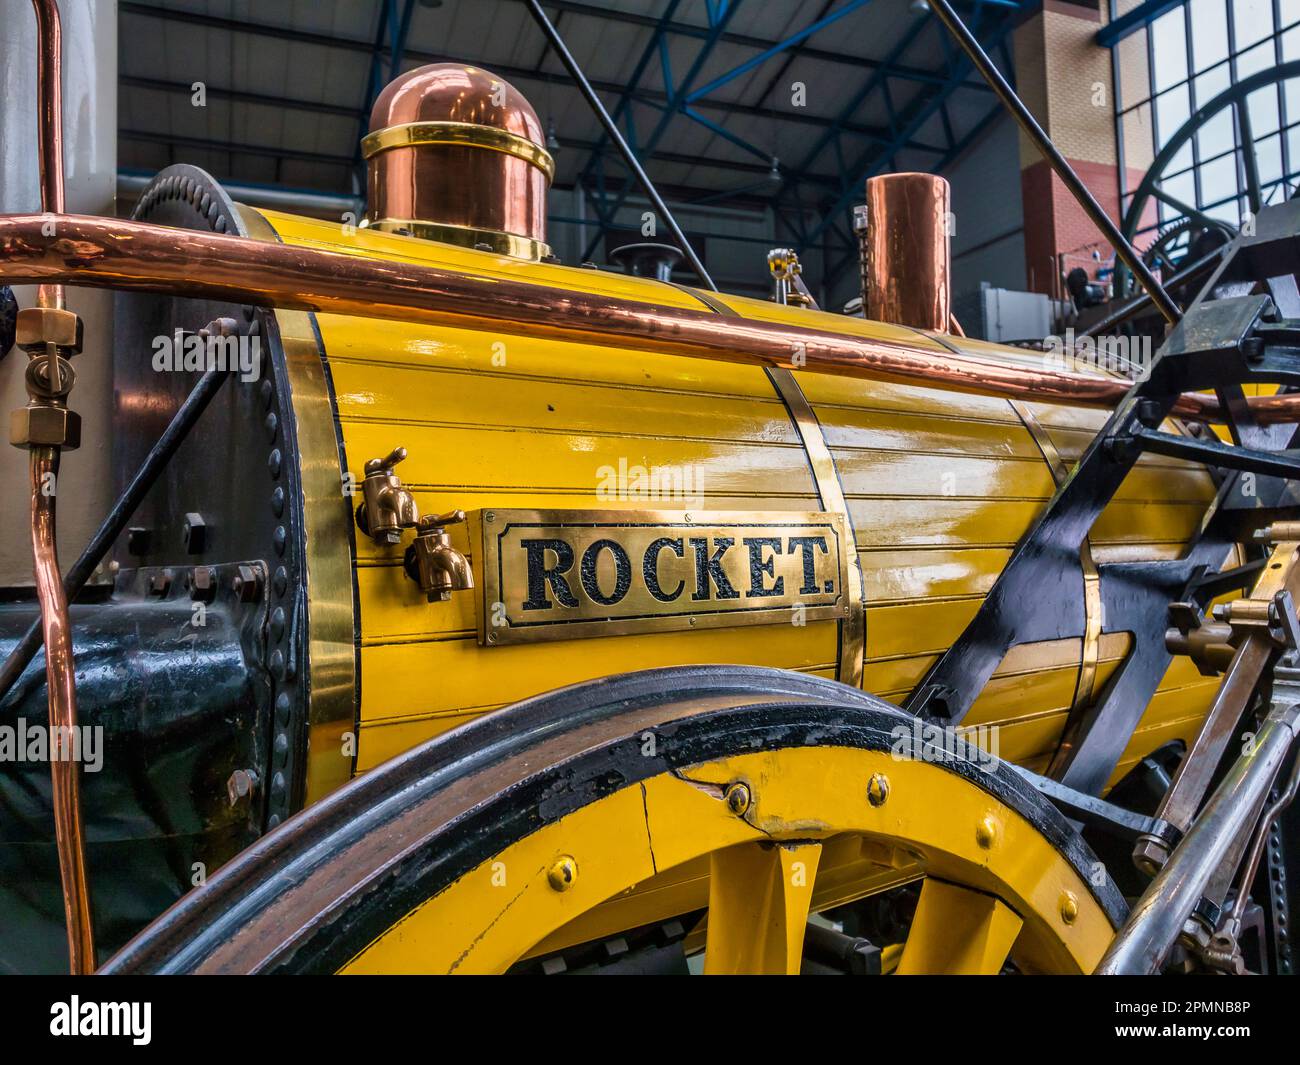 General image inside the National Railway Museum in York seen here featuring a replica of Robert Stephenson's Rocket locomotive Stock Photo